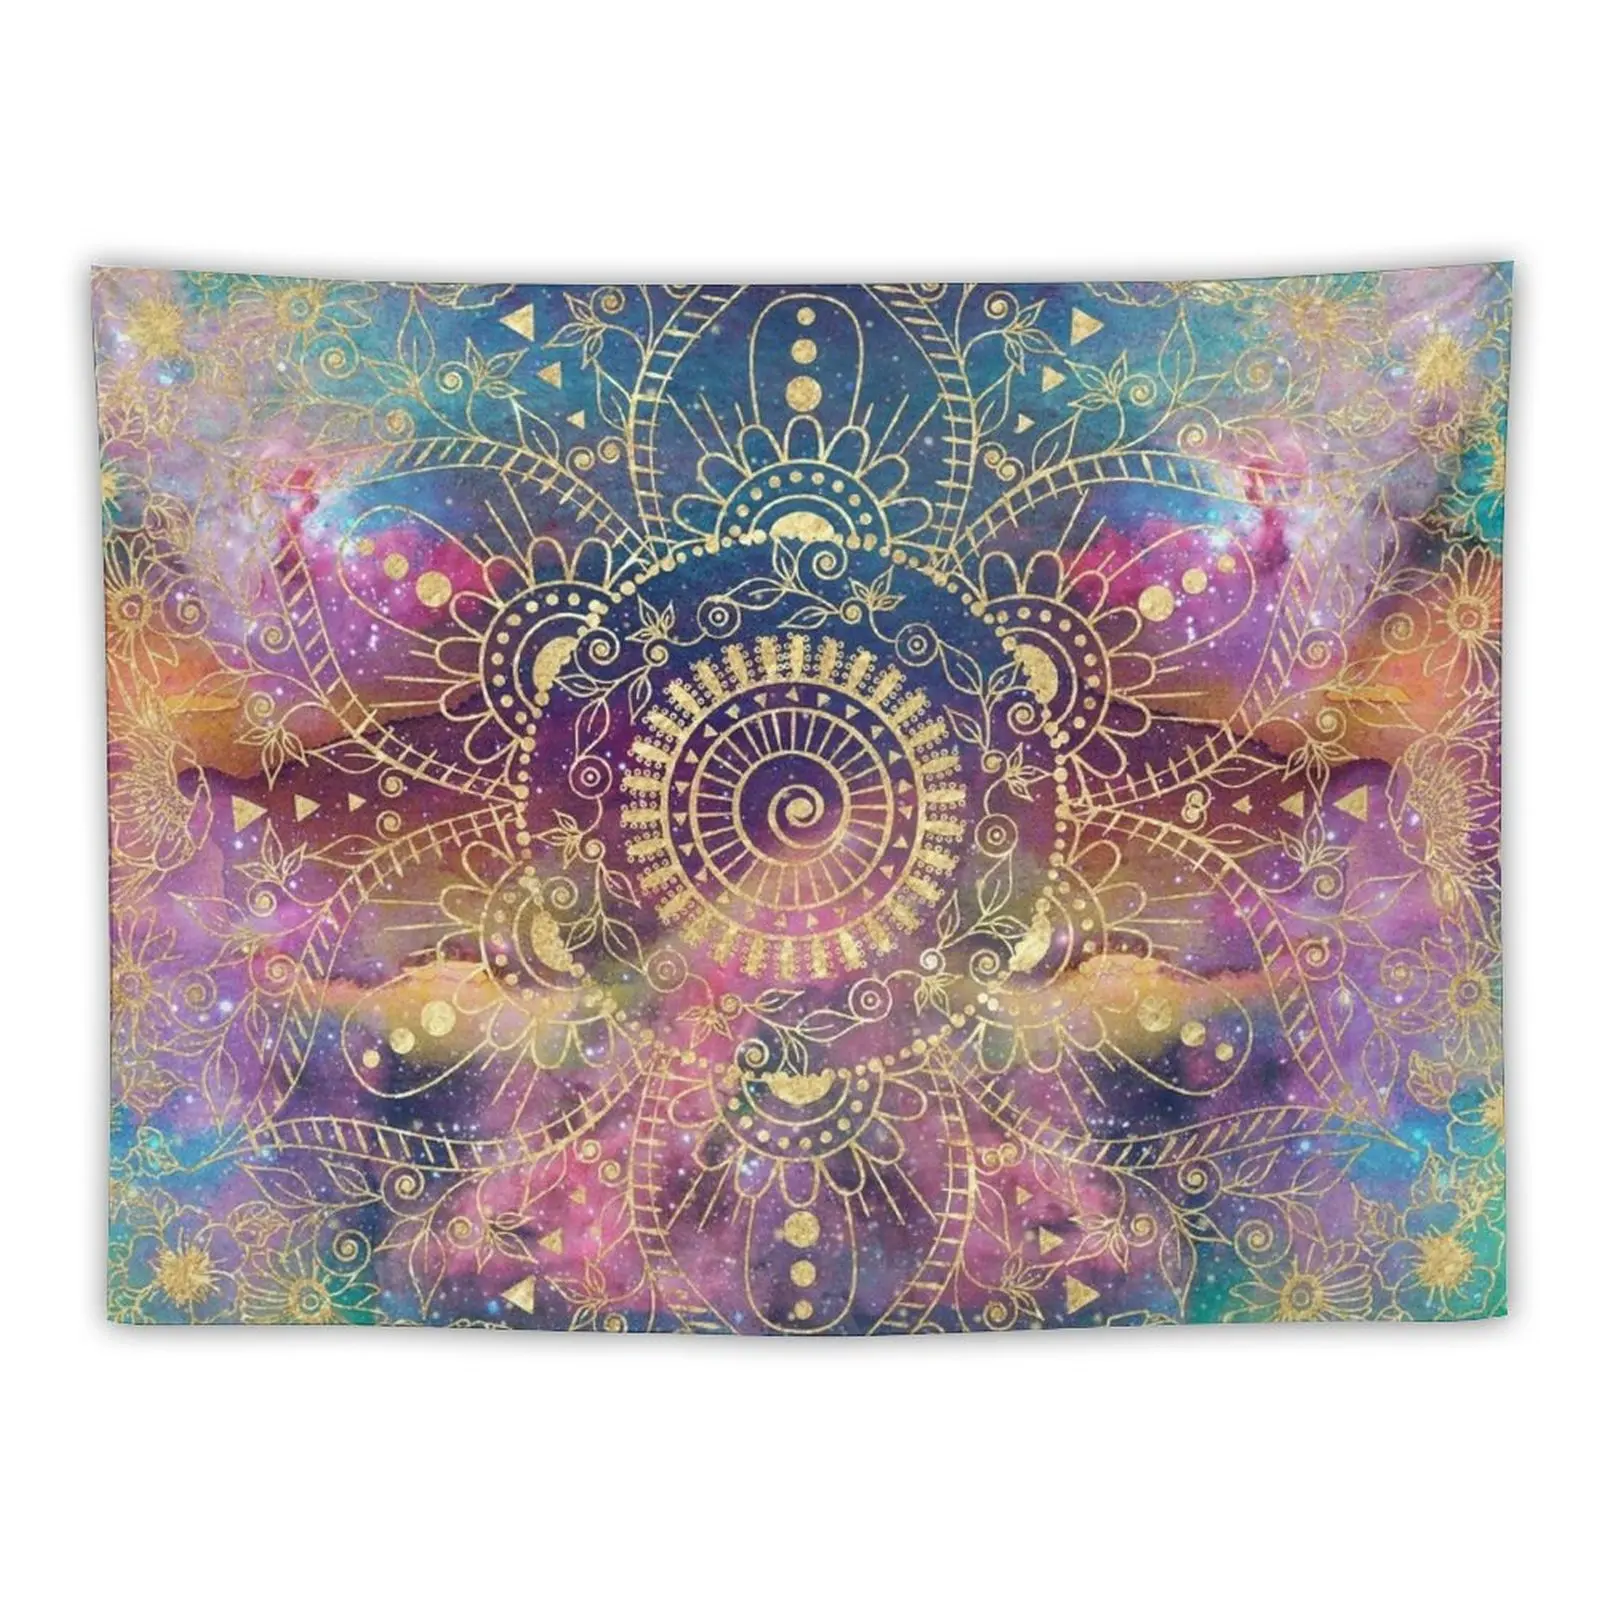 

Gold Mandala Watercolor Colorful Nebula Tapestry Bedroom Decor Aesthetic Wall Hanging Decor Room Decor Cute Tapestry